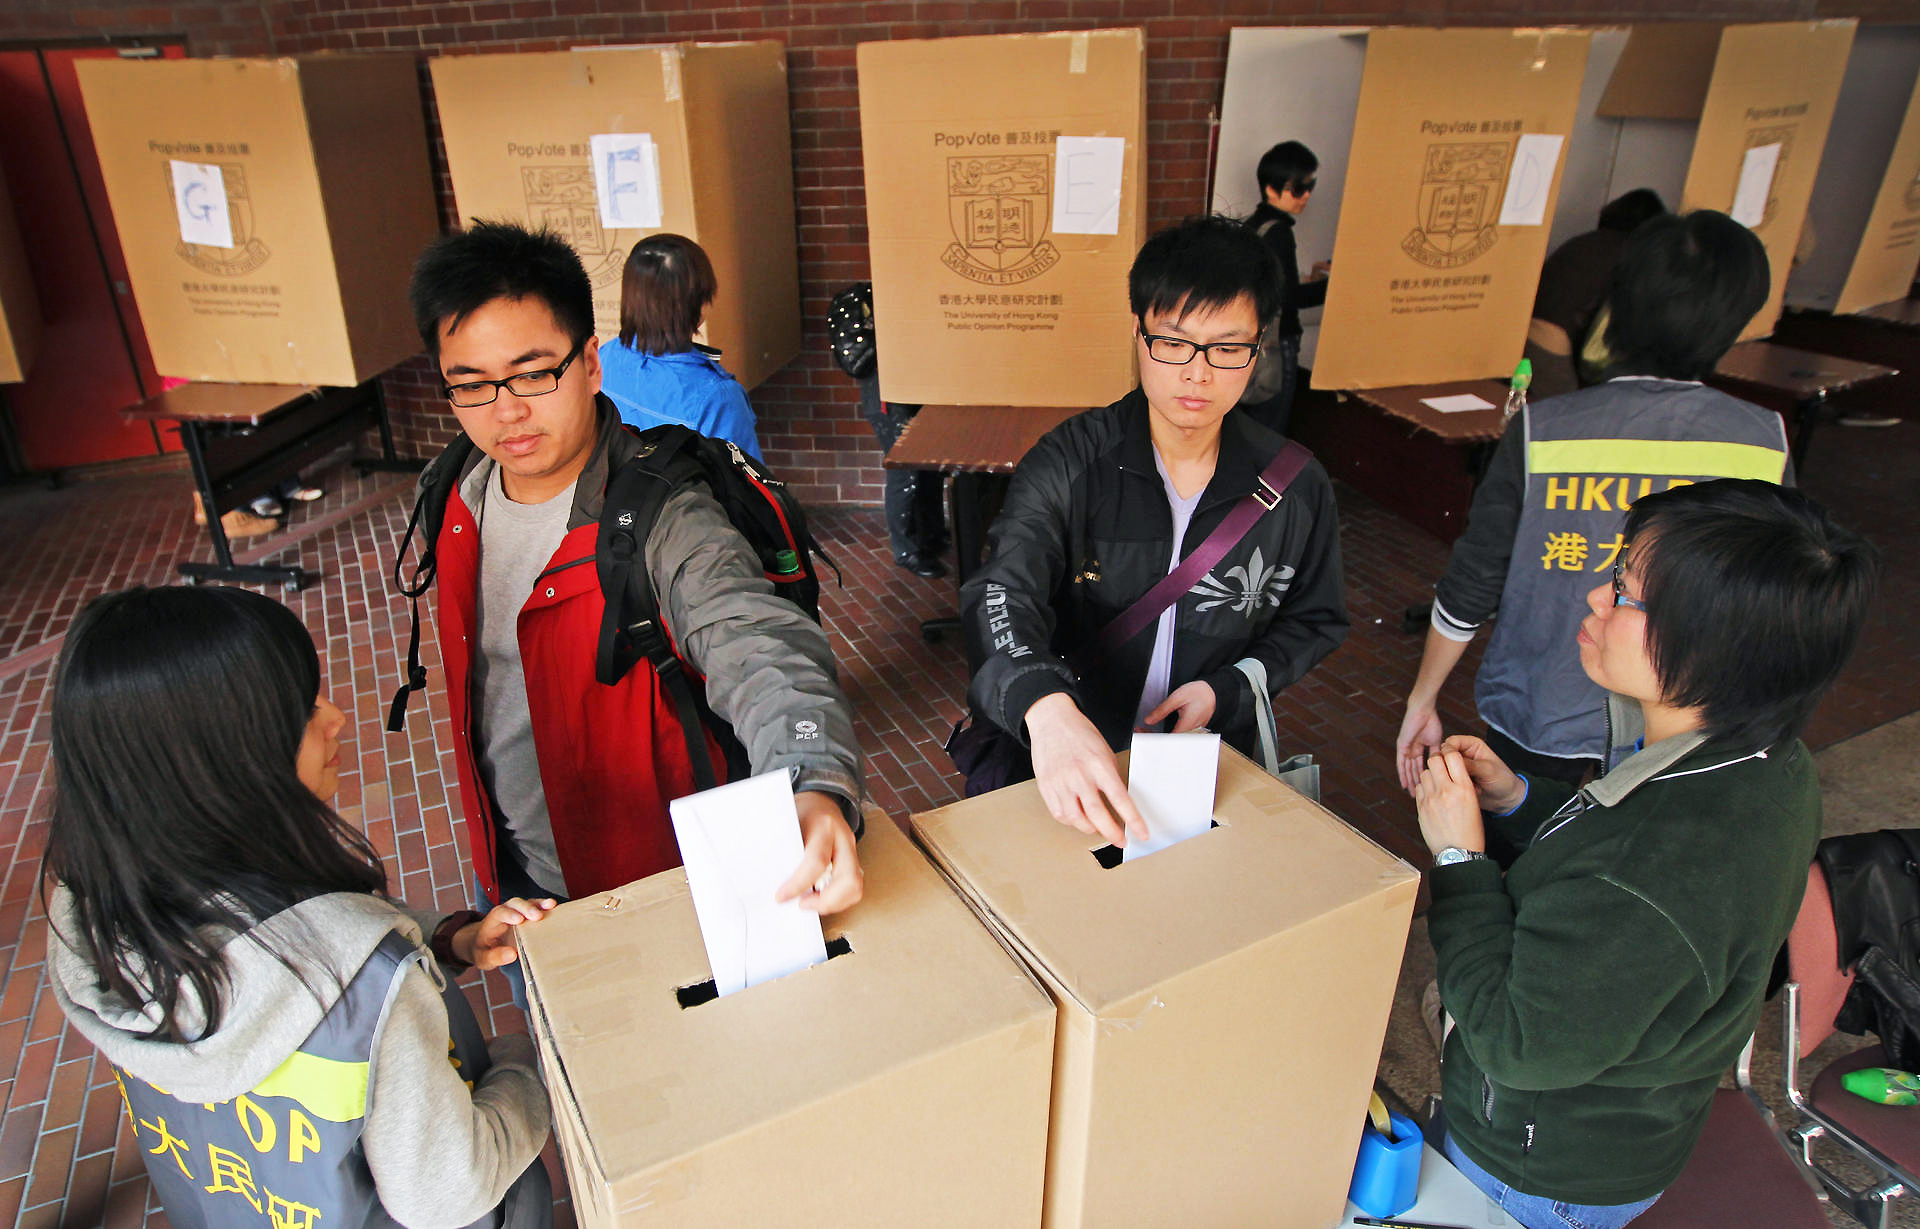 People had to use paper votes last year. Photo: Dickson Lee